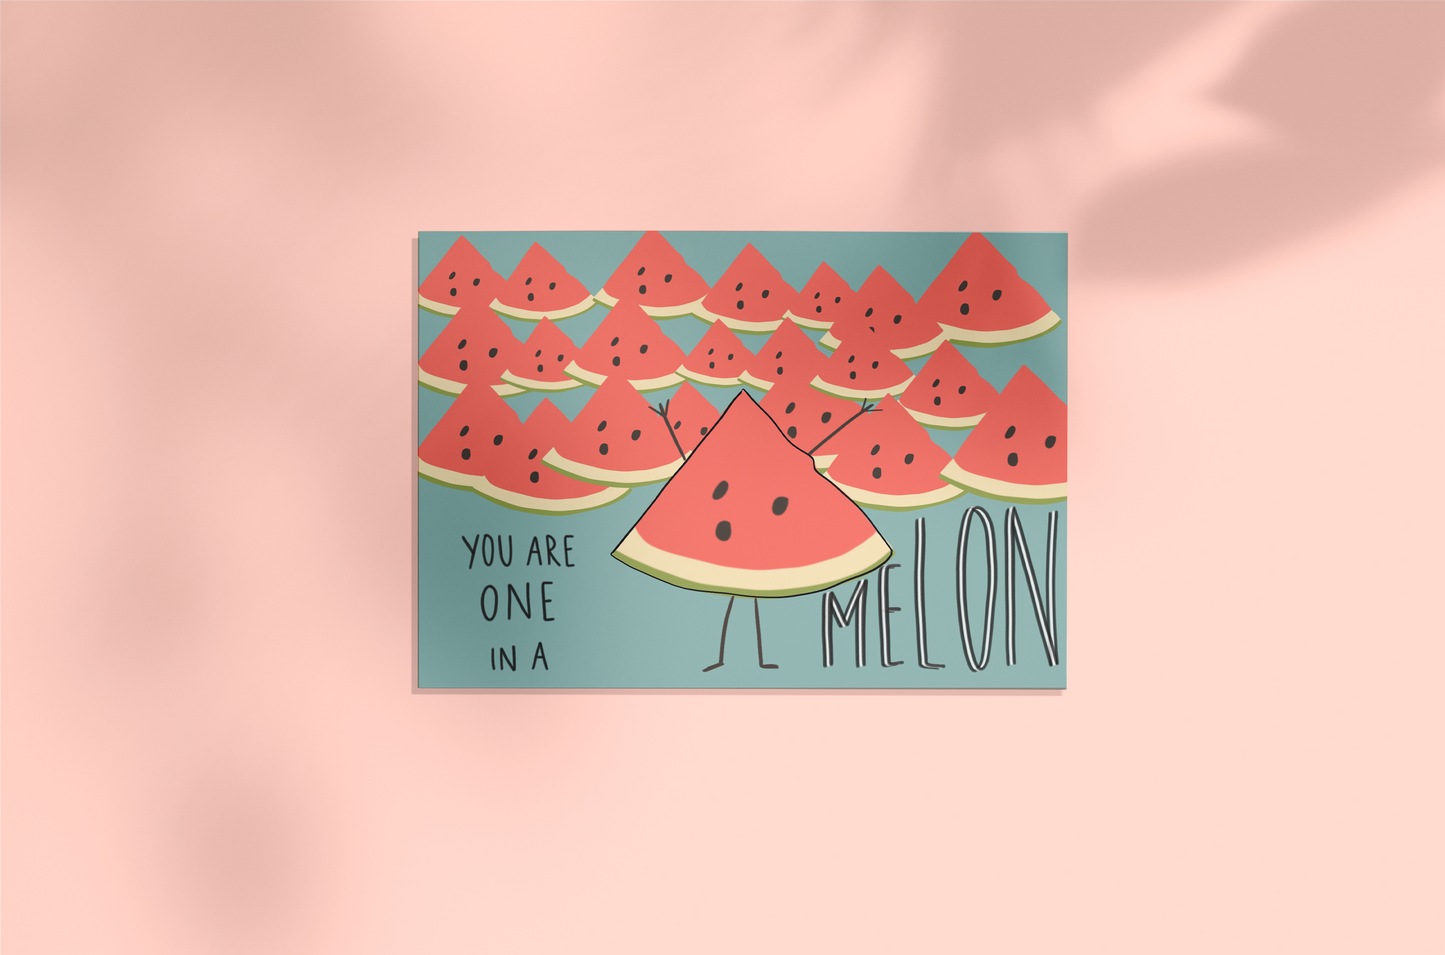 You are one in a MELON